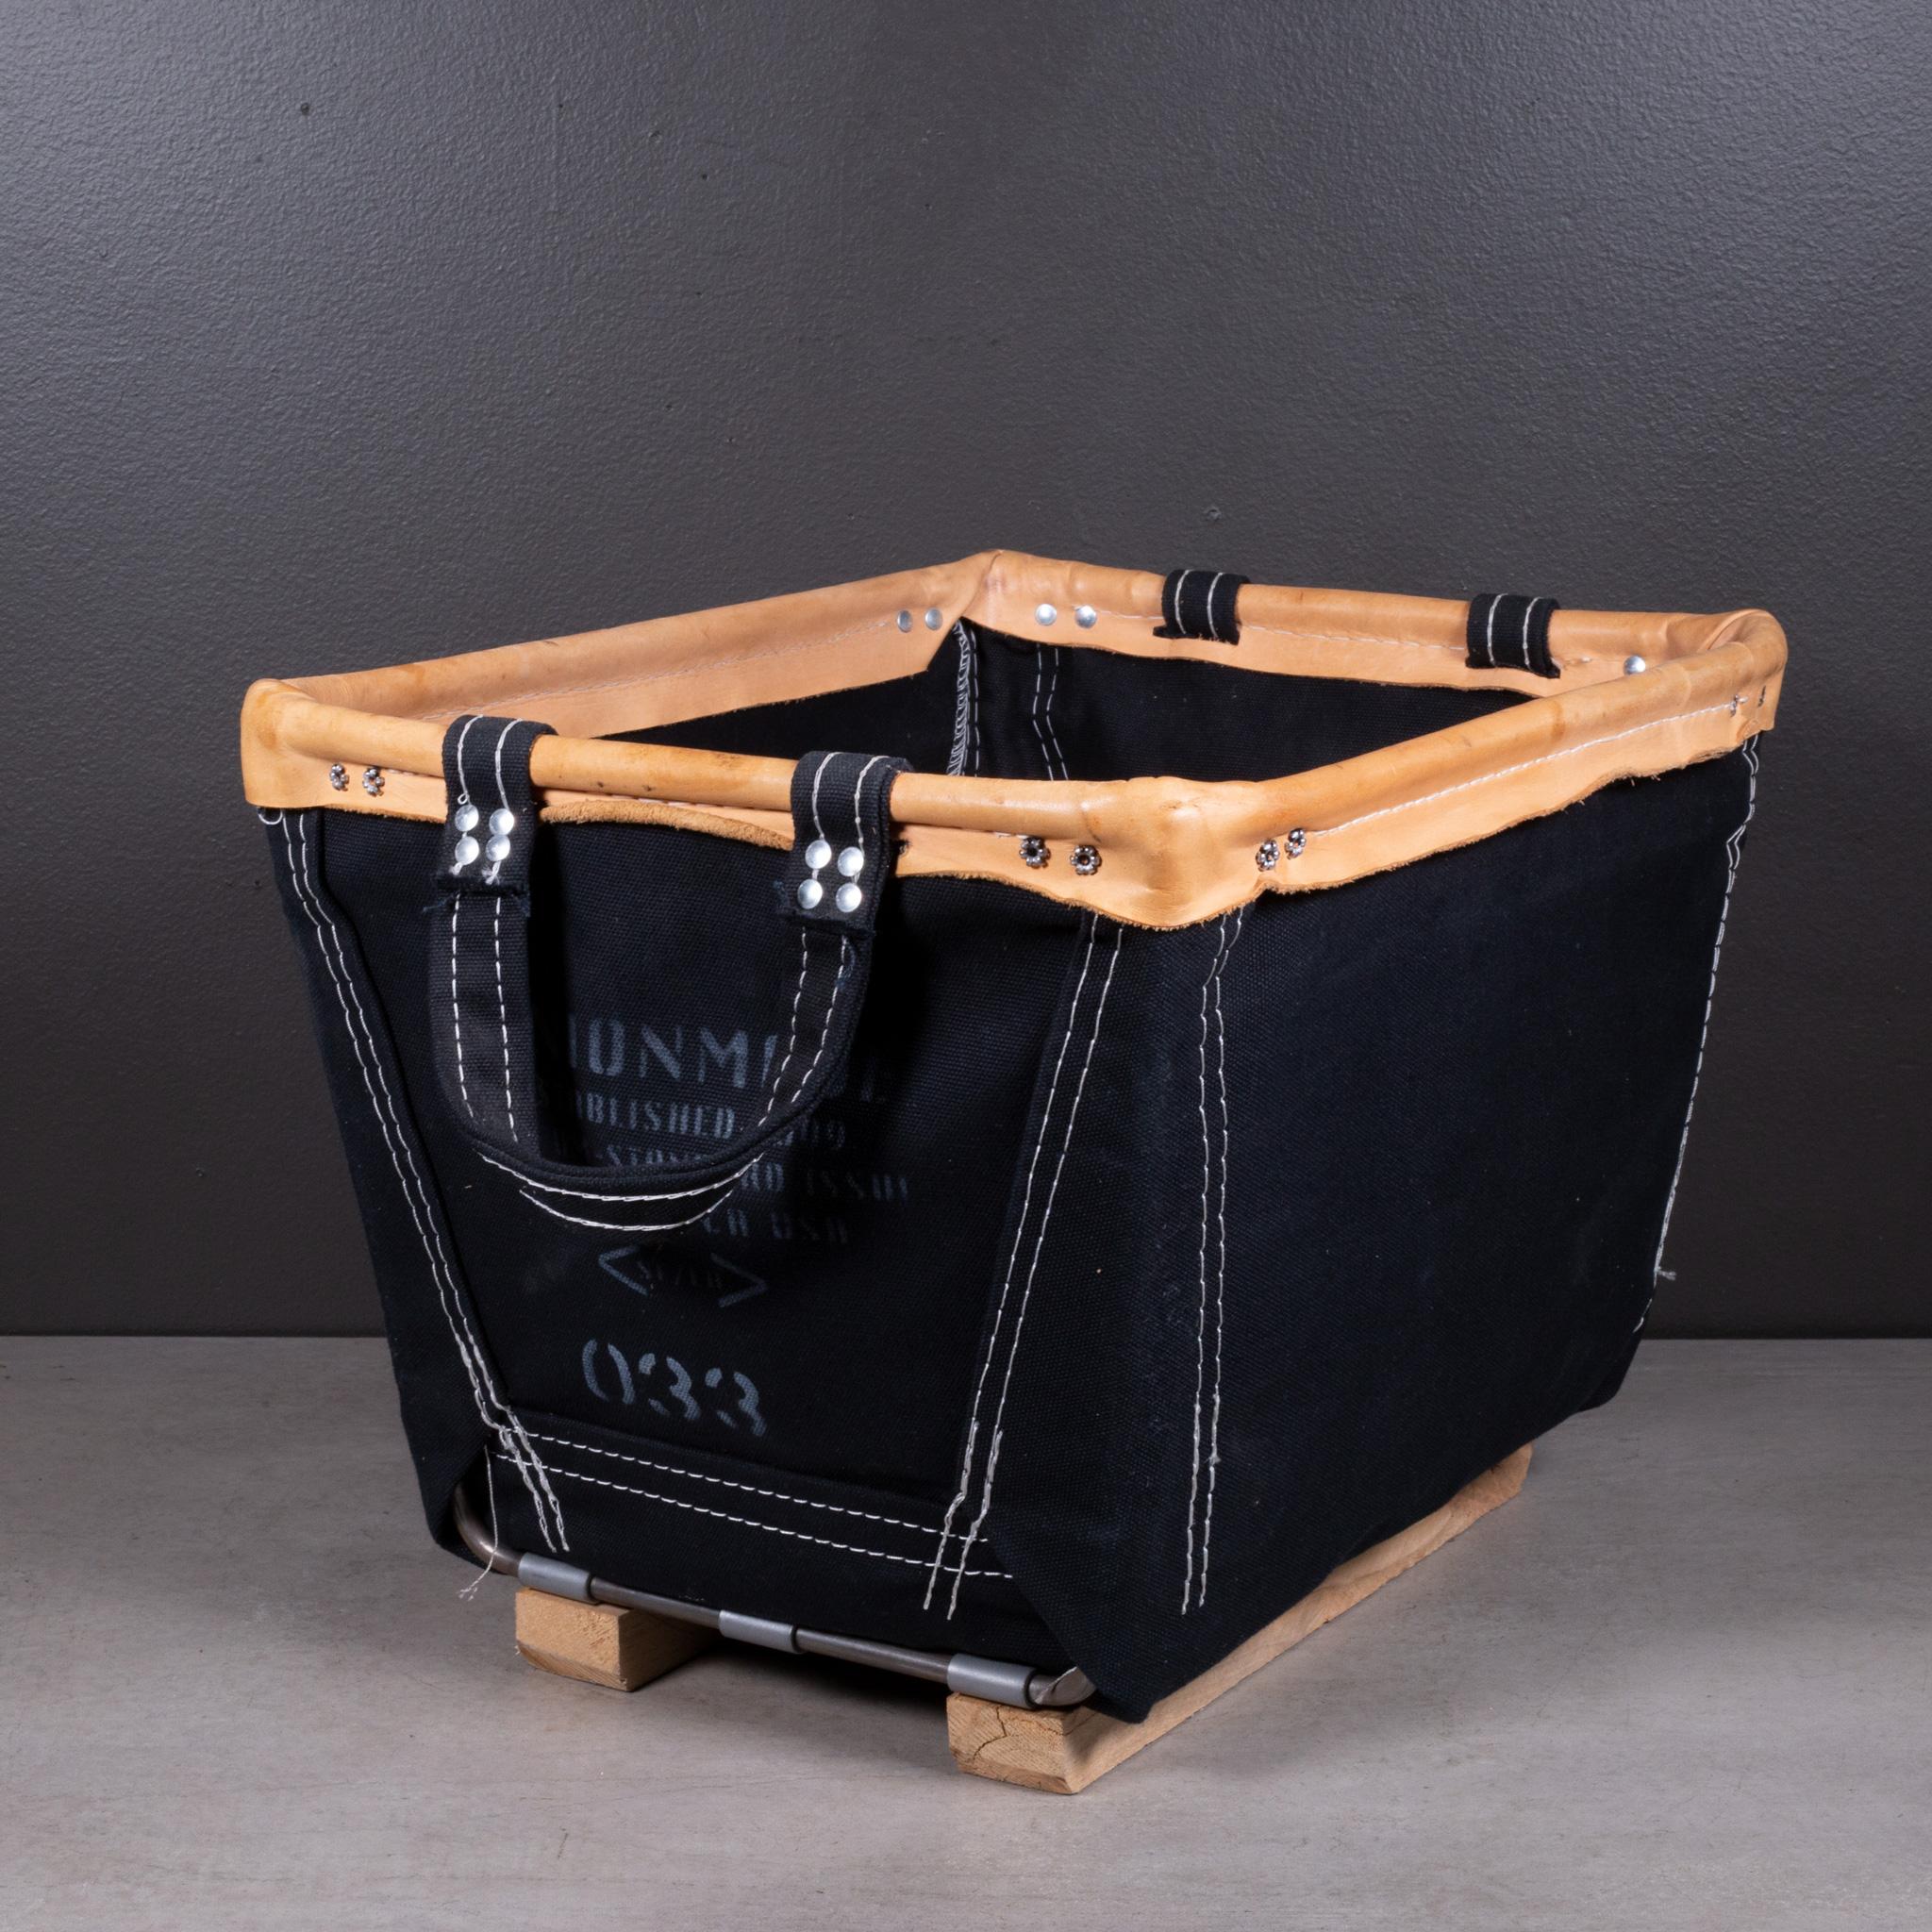 Modern Steel Canvas Basket Corp Baskets With Leather Trim-Price per piece